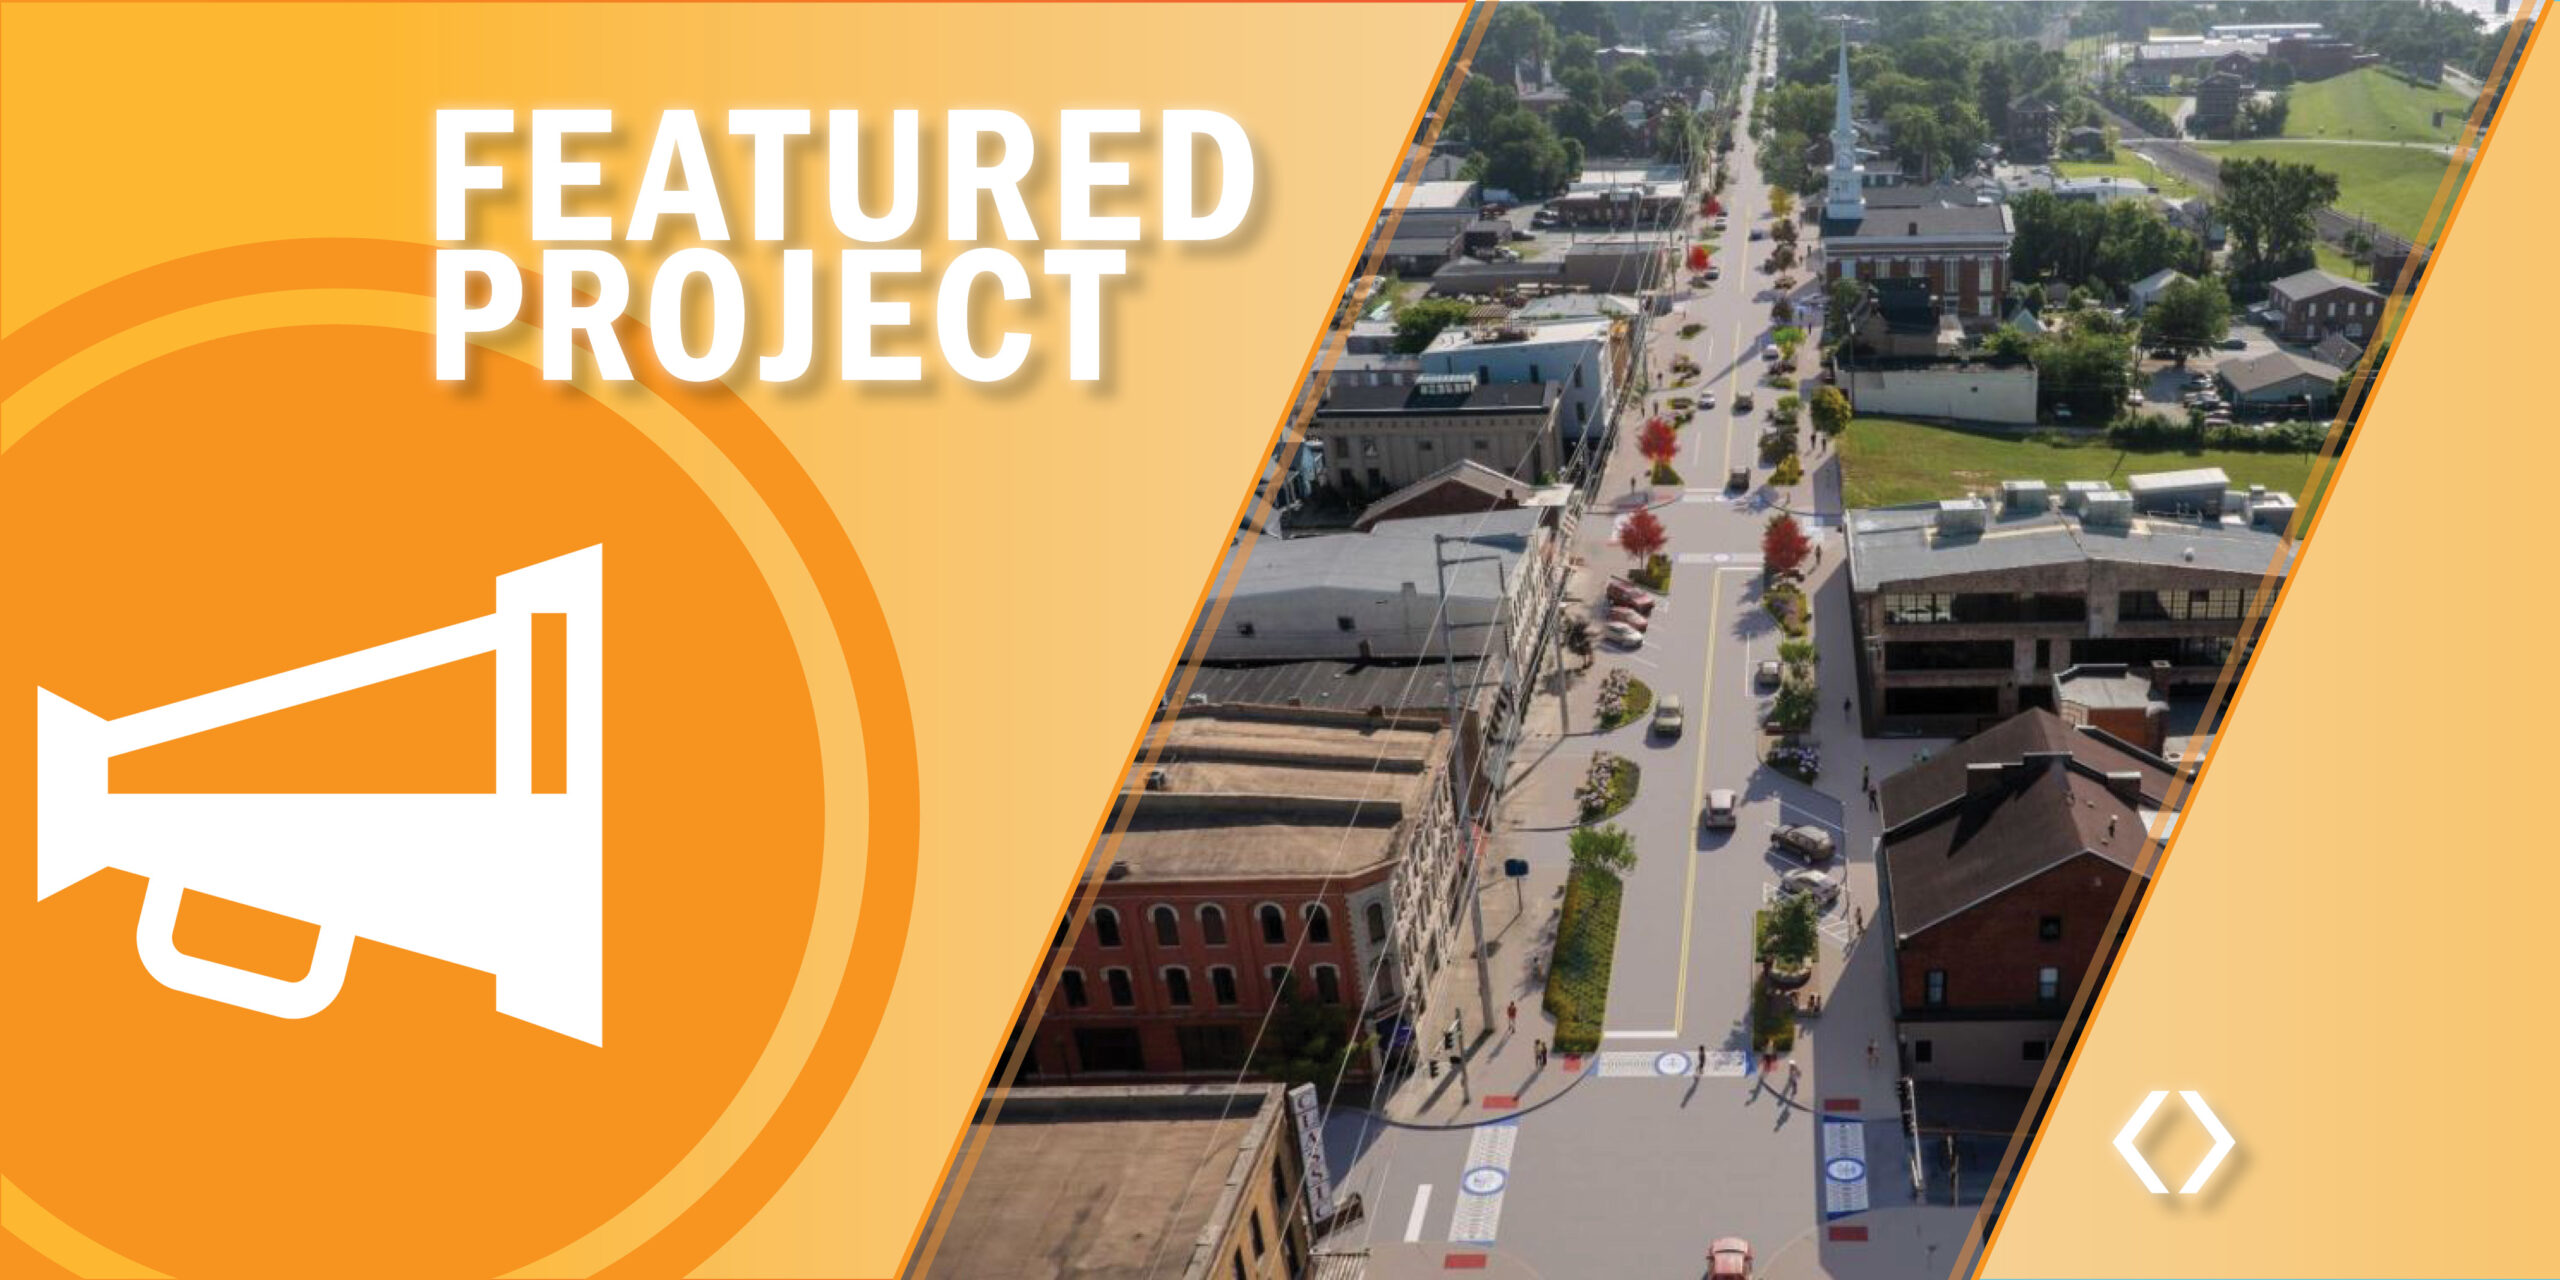 featured project: new albany main street revitalization project; image overhead view of main street